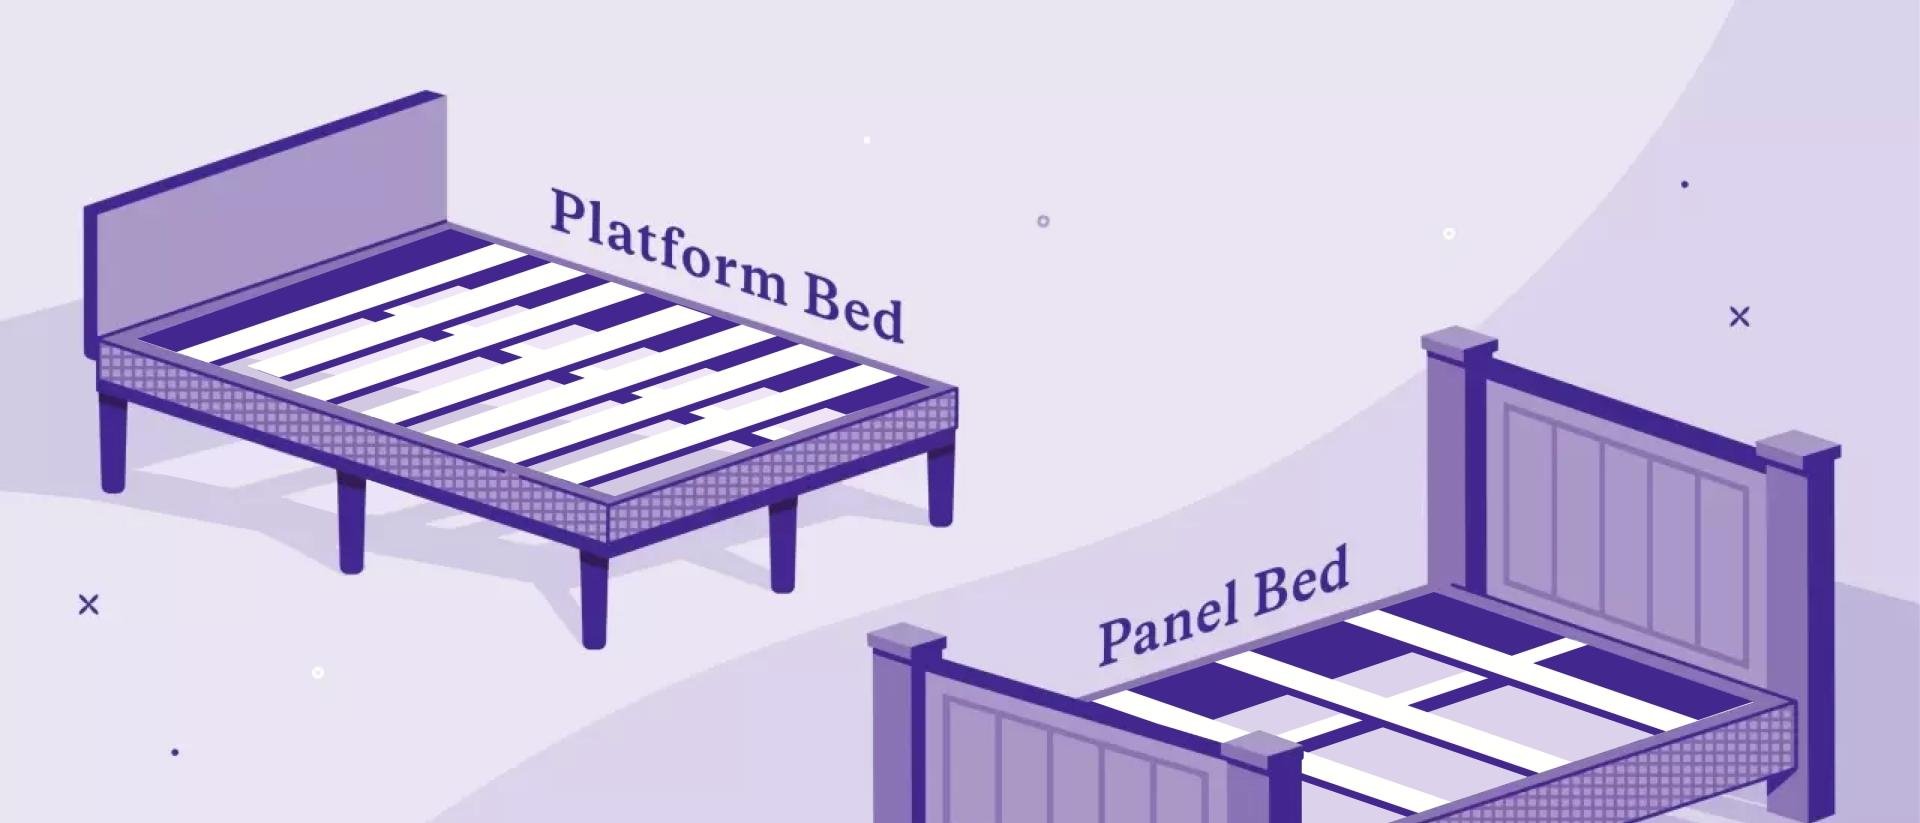 panel bed and platform bed